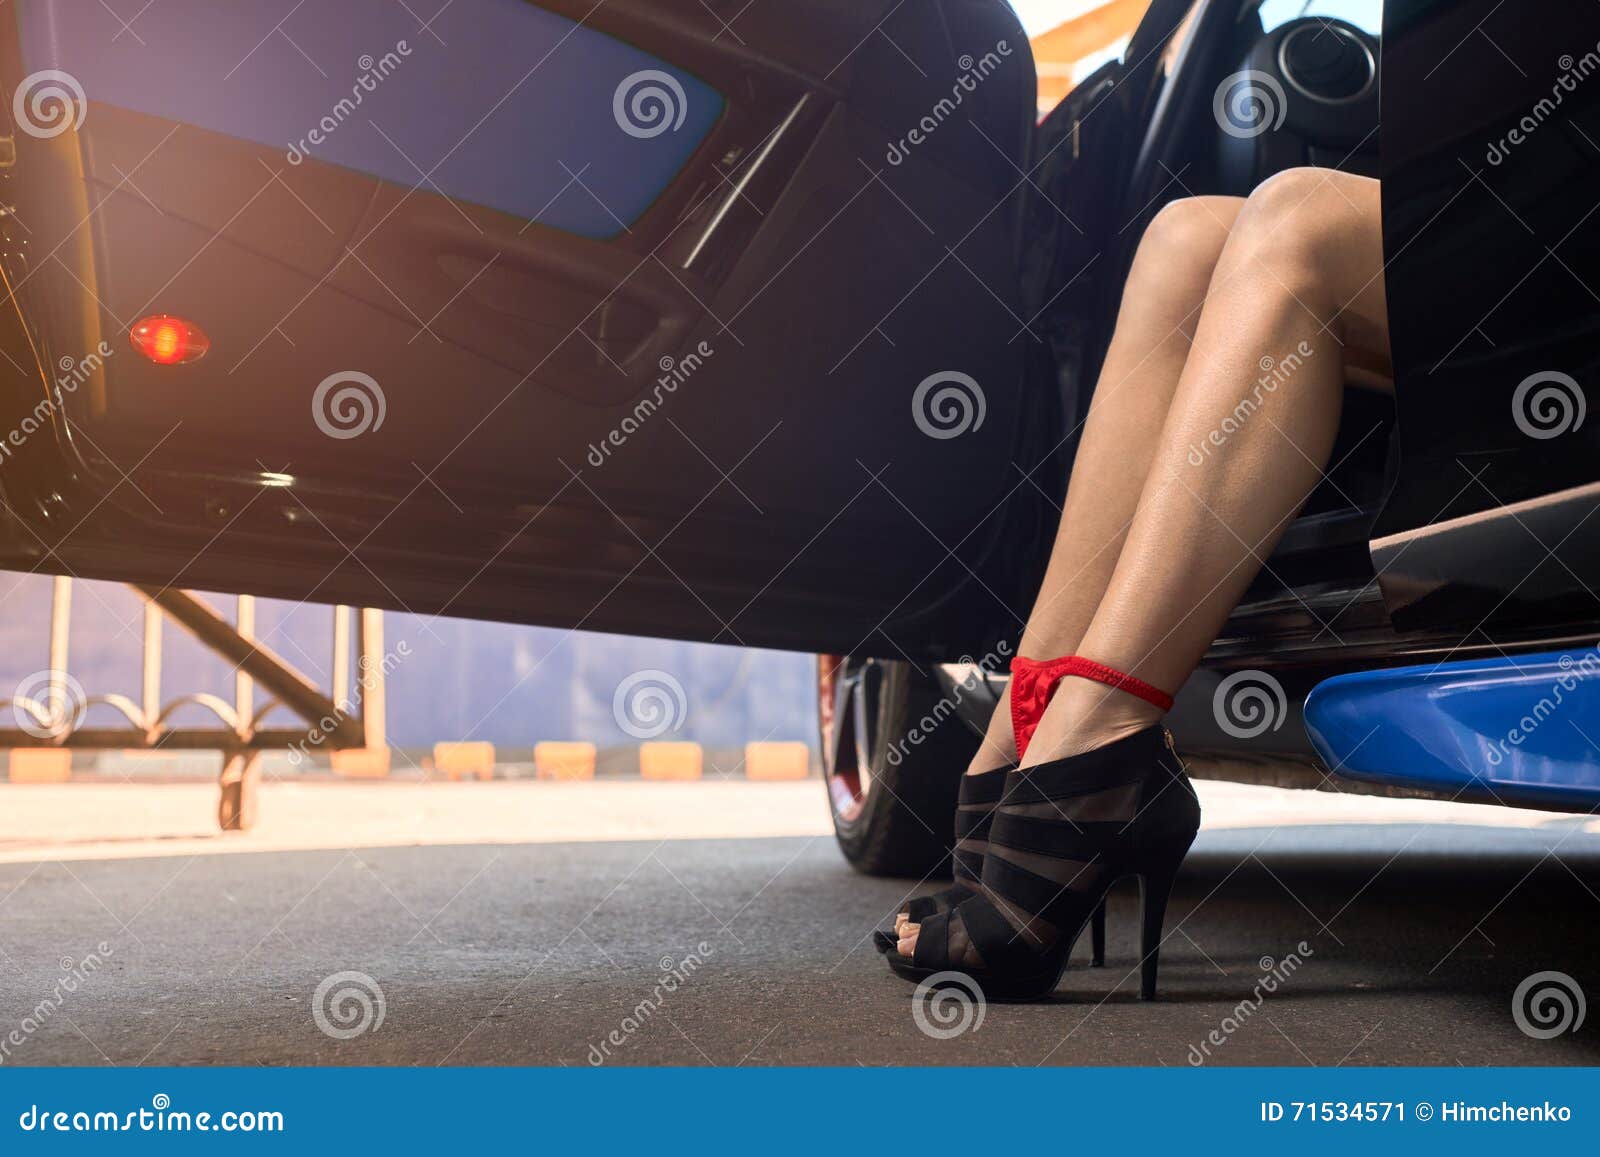 Women S Legs Sticking Out of Car Window Stock Image - Image of rear ...